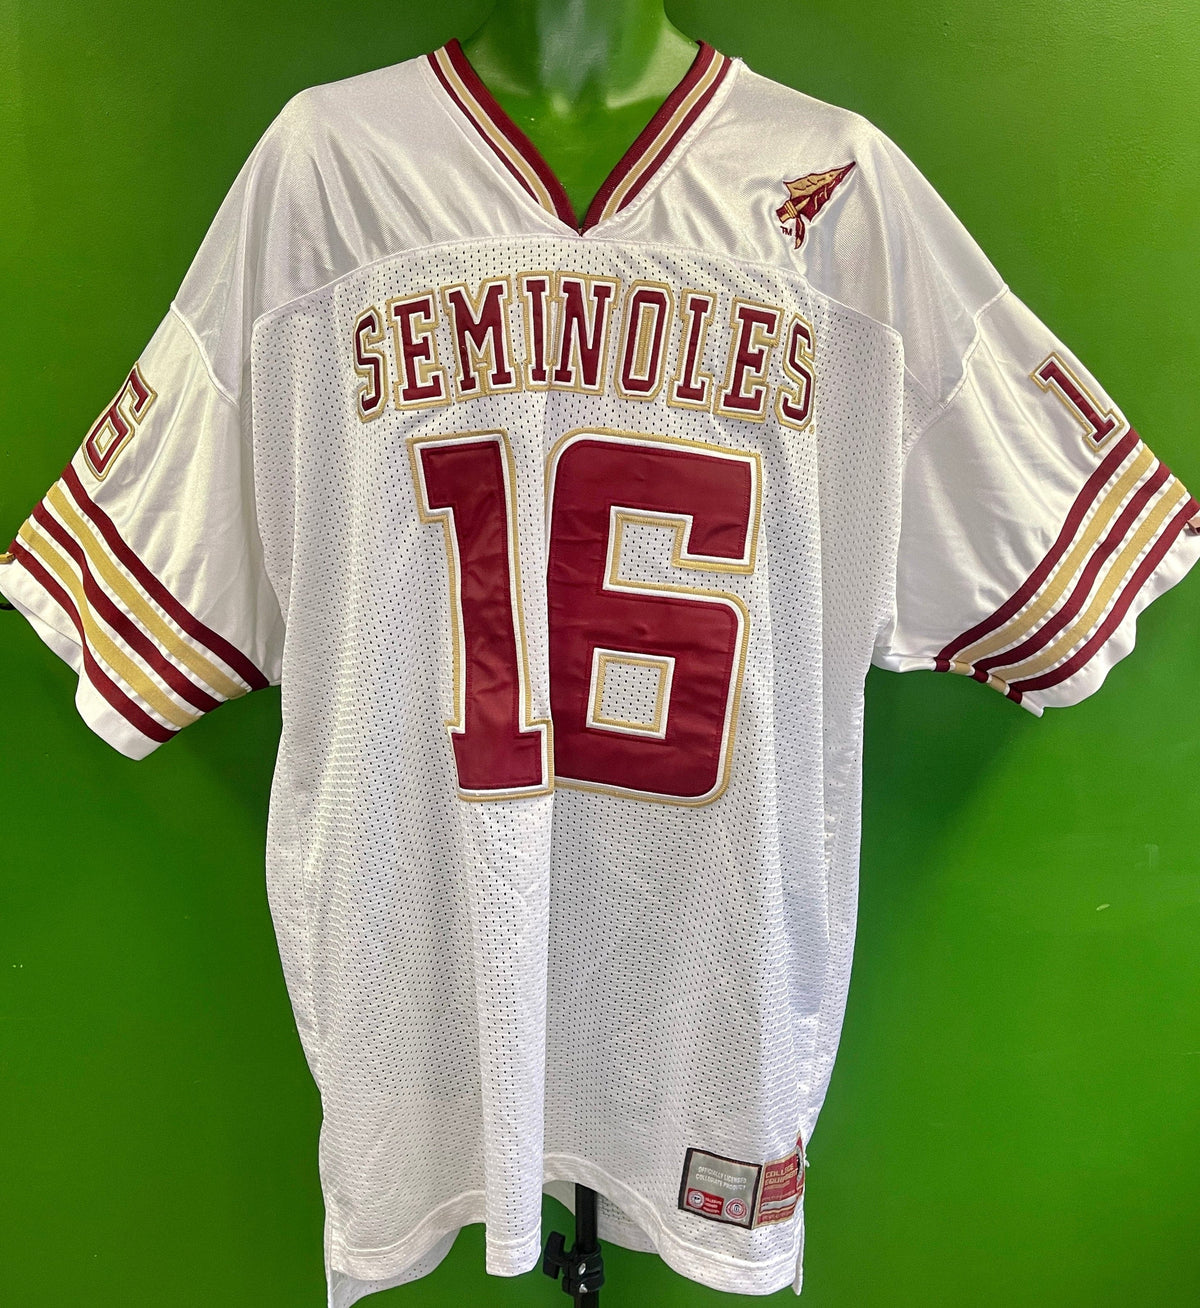 NCAA Florida State Seminoles Colosseum #16 Stitched Mesh Jersey Men's 2X-Large